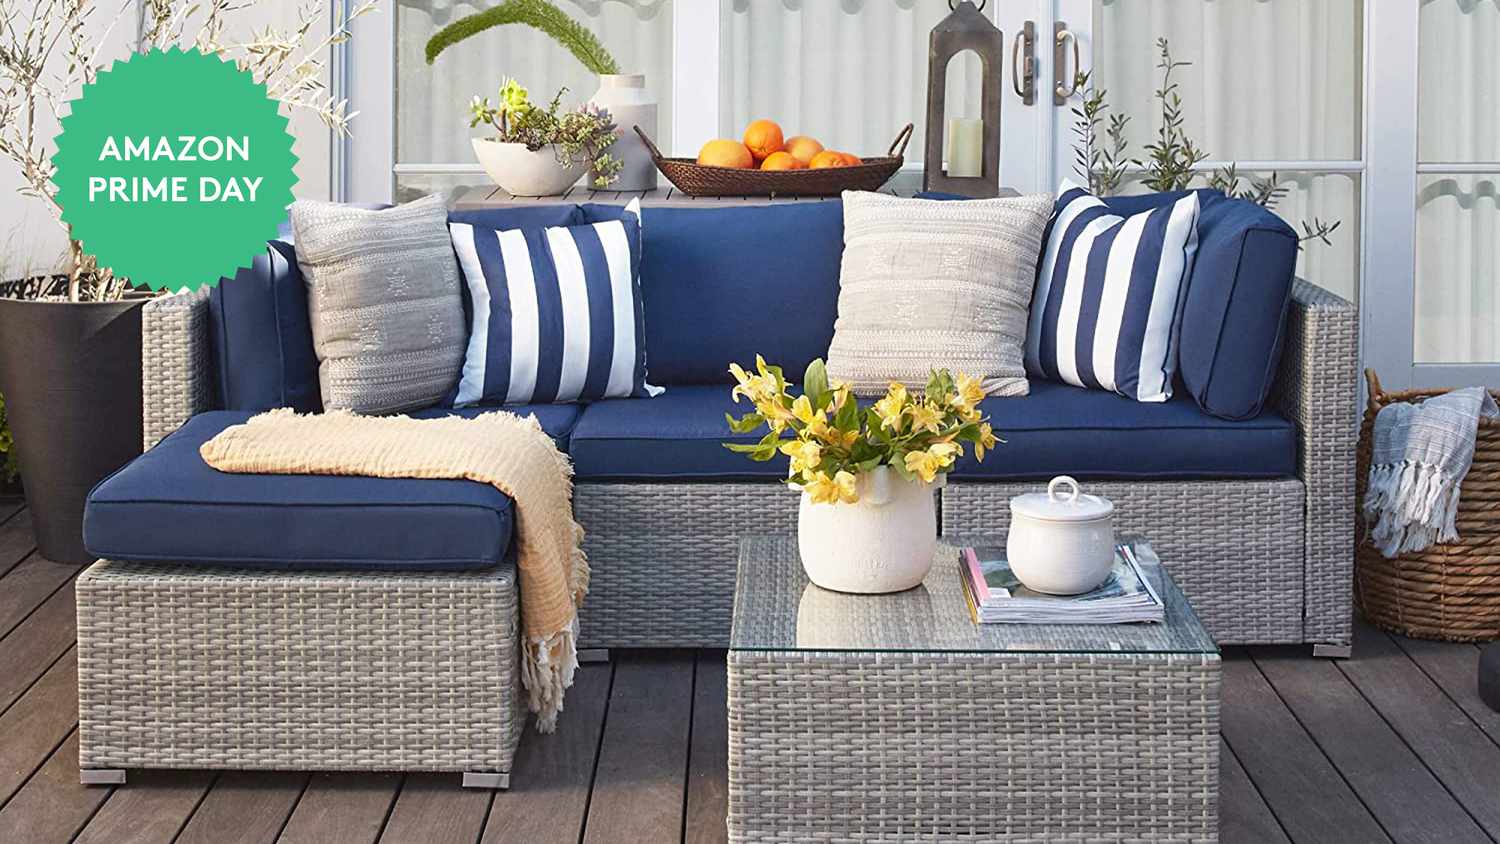 Epic Amazon Prime Day Patio Furniture Deals Up to 58{dd3cf16dc48cbccde1cb5083e00e749fe70e501950bc2e0dea1feff25a82382f} Off